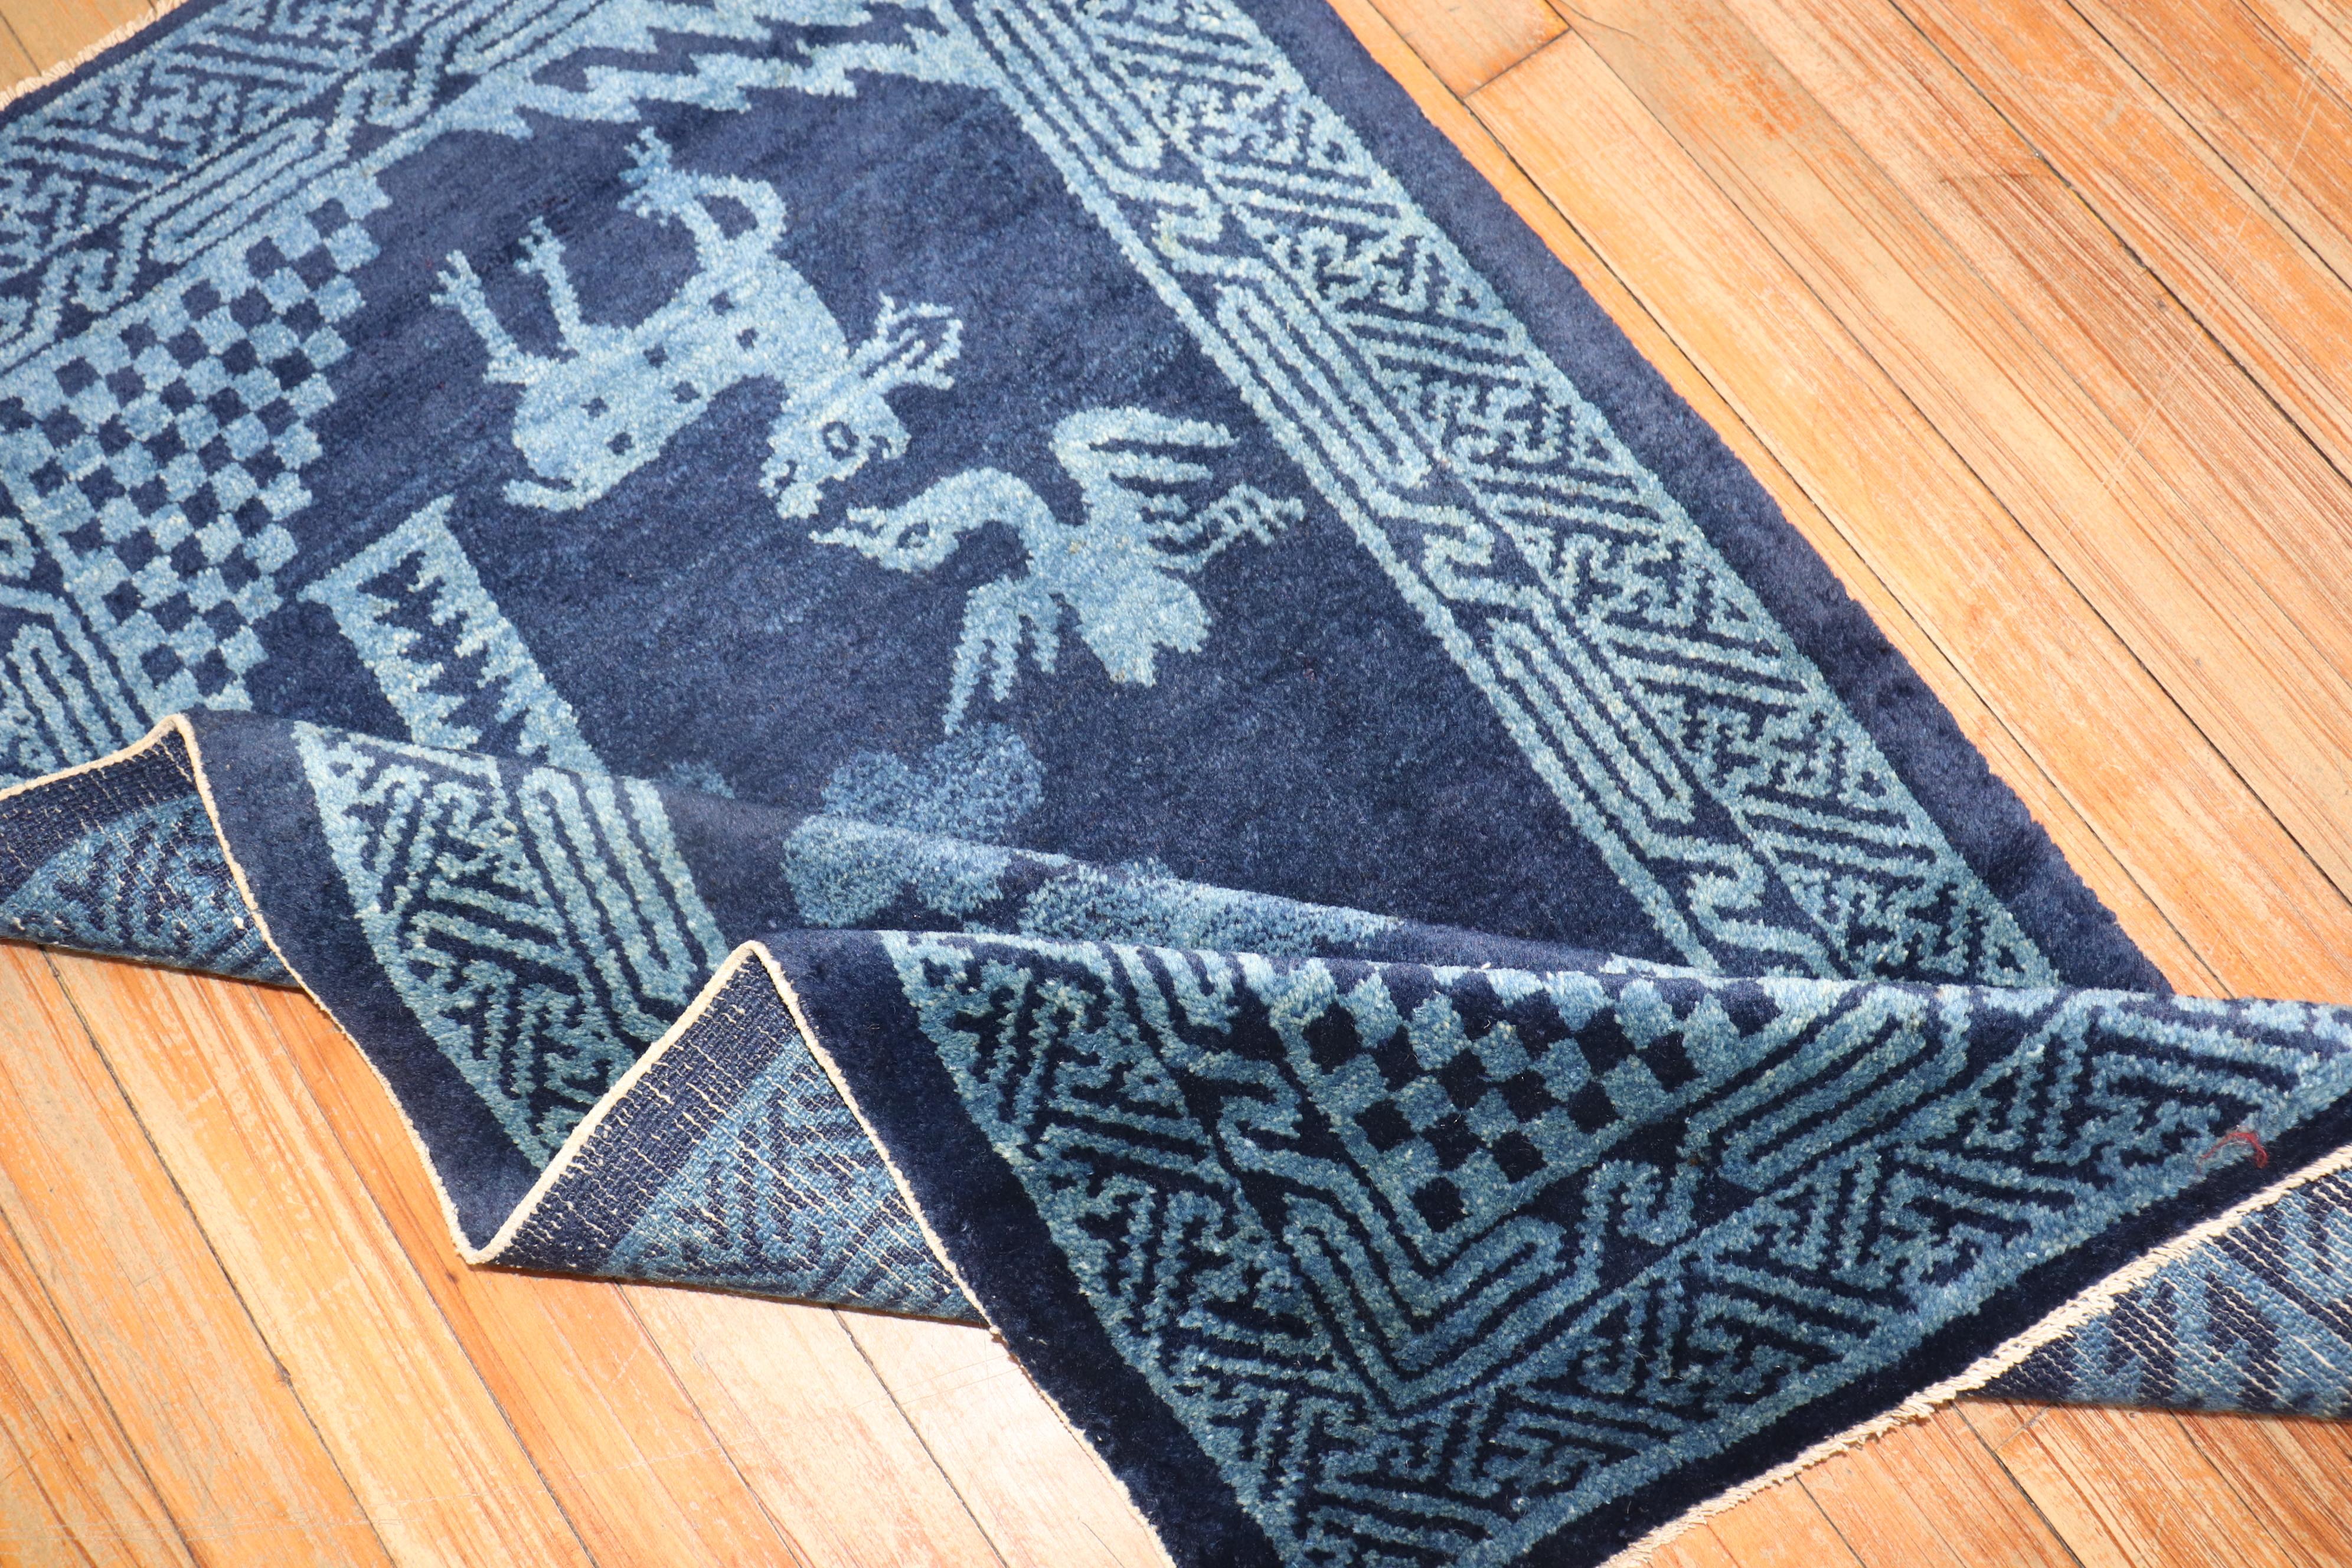 A Chinese peking carpet in midnight blue with a pictorial animal motif.

Measures: 2'3'' x 4'.